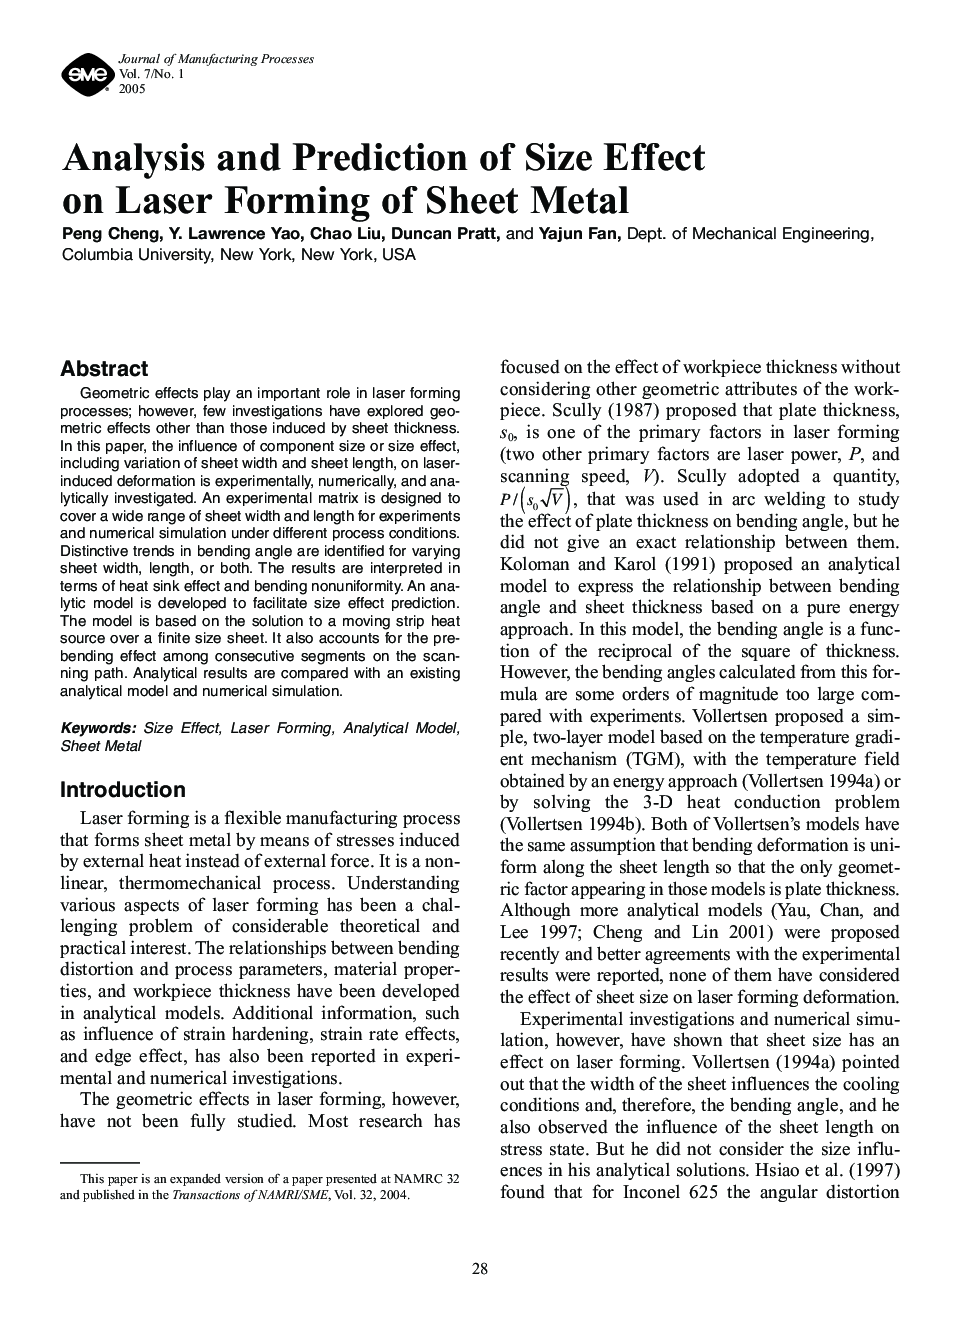 Analysis and Prediction of Size Effect on Laser Forming of Sheet Metal